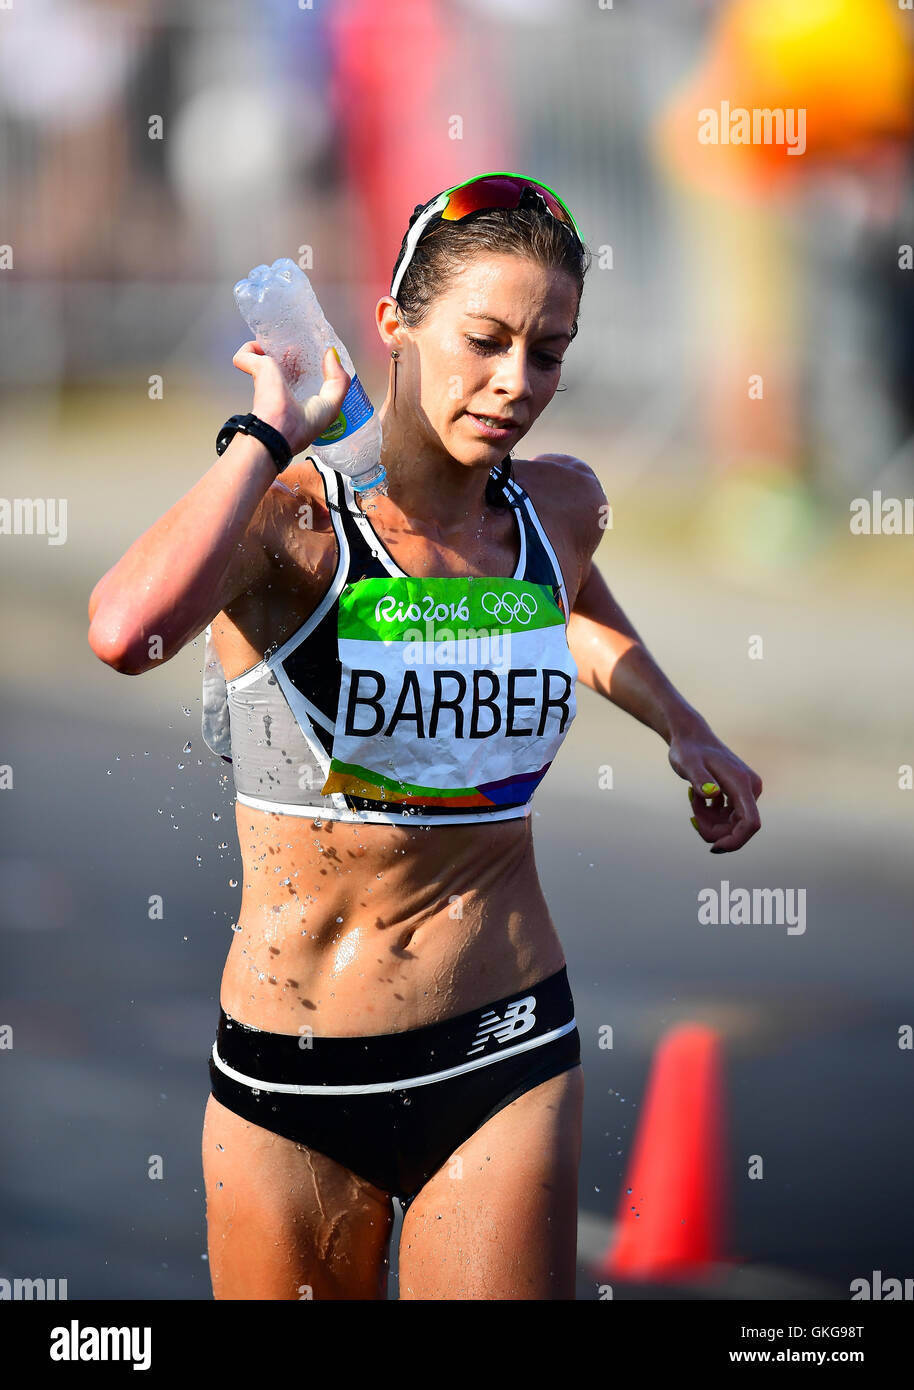 Rio de Janeiro, Brazil. 19th August, 2016. Alana Barber of New Zealand during the womens 20km race walk on Day 14 of the 2016 Rio Olympics at Pontal on August 19, 2016 in Rio de Janeiro, Brazil. (Photo by Roger Sedres/Gallo Images) Credit:  Roger Sedres/Alamy Live News Stock Photo